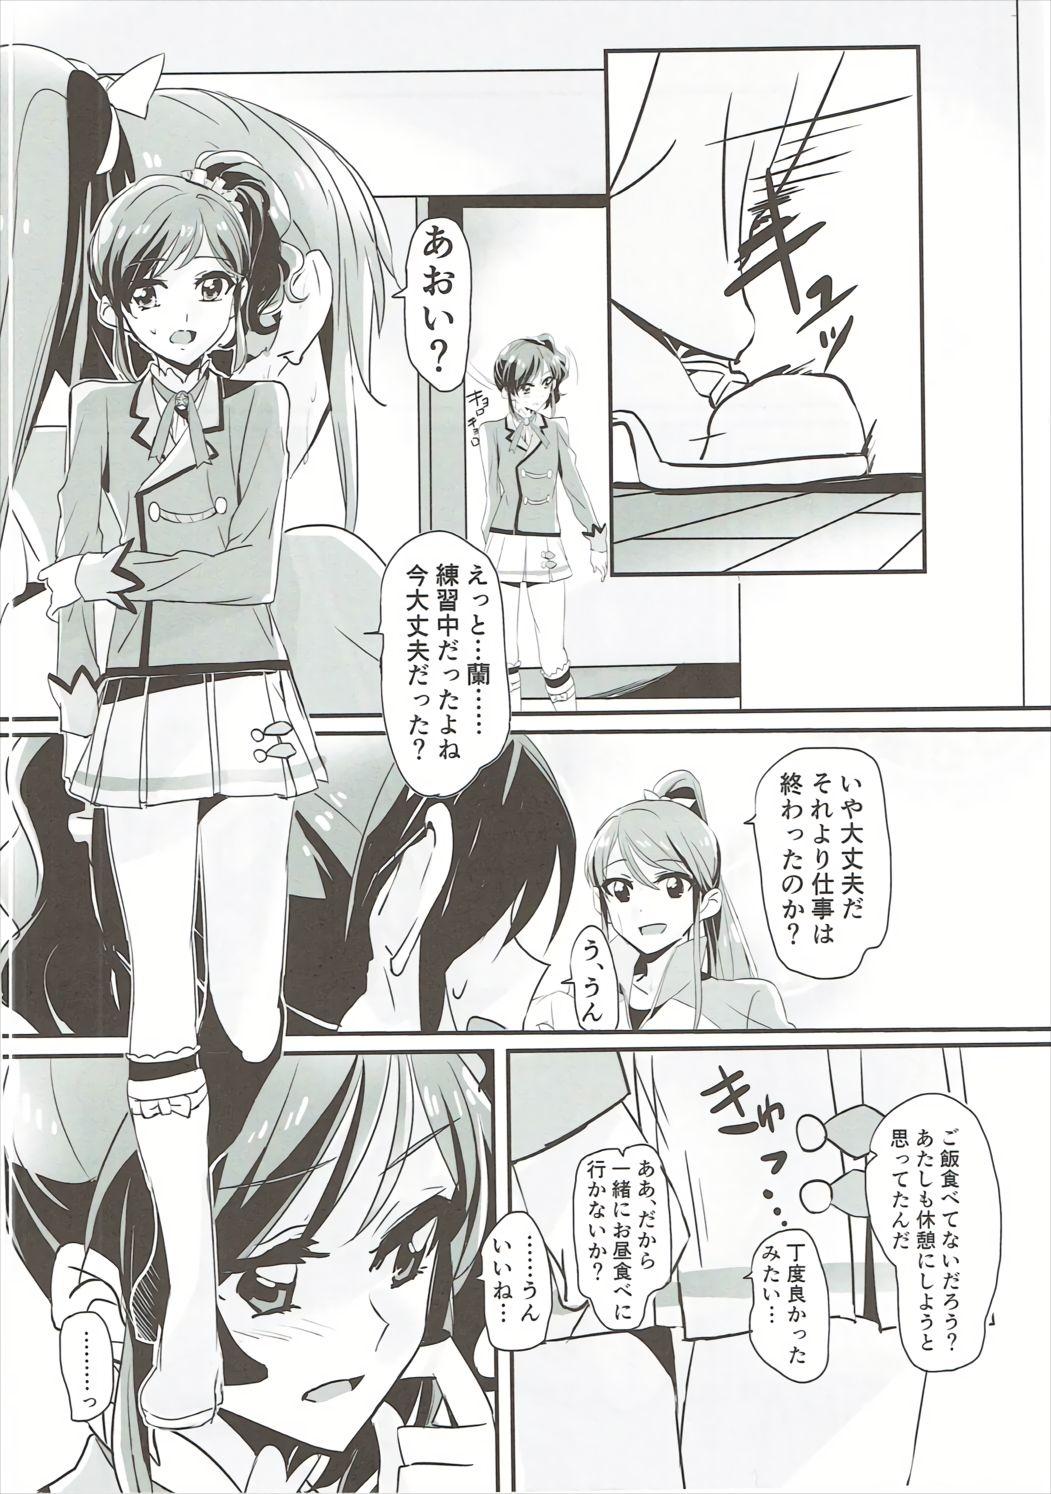 Gaygroup Little incident - Aikatsu Stretch - Page 3